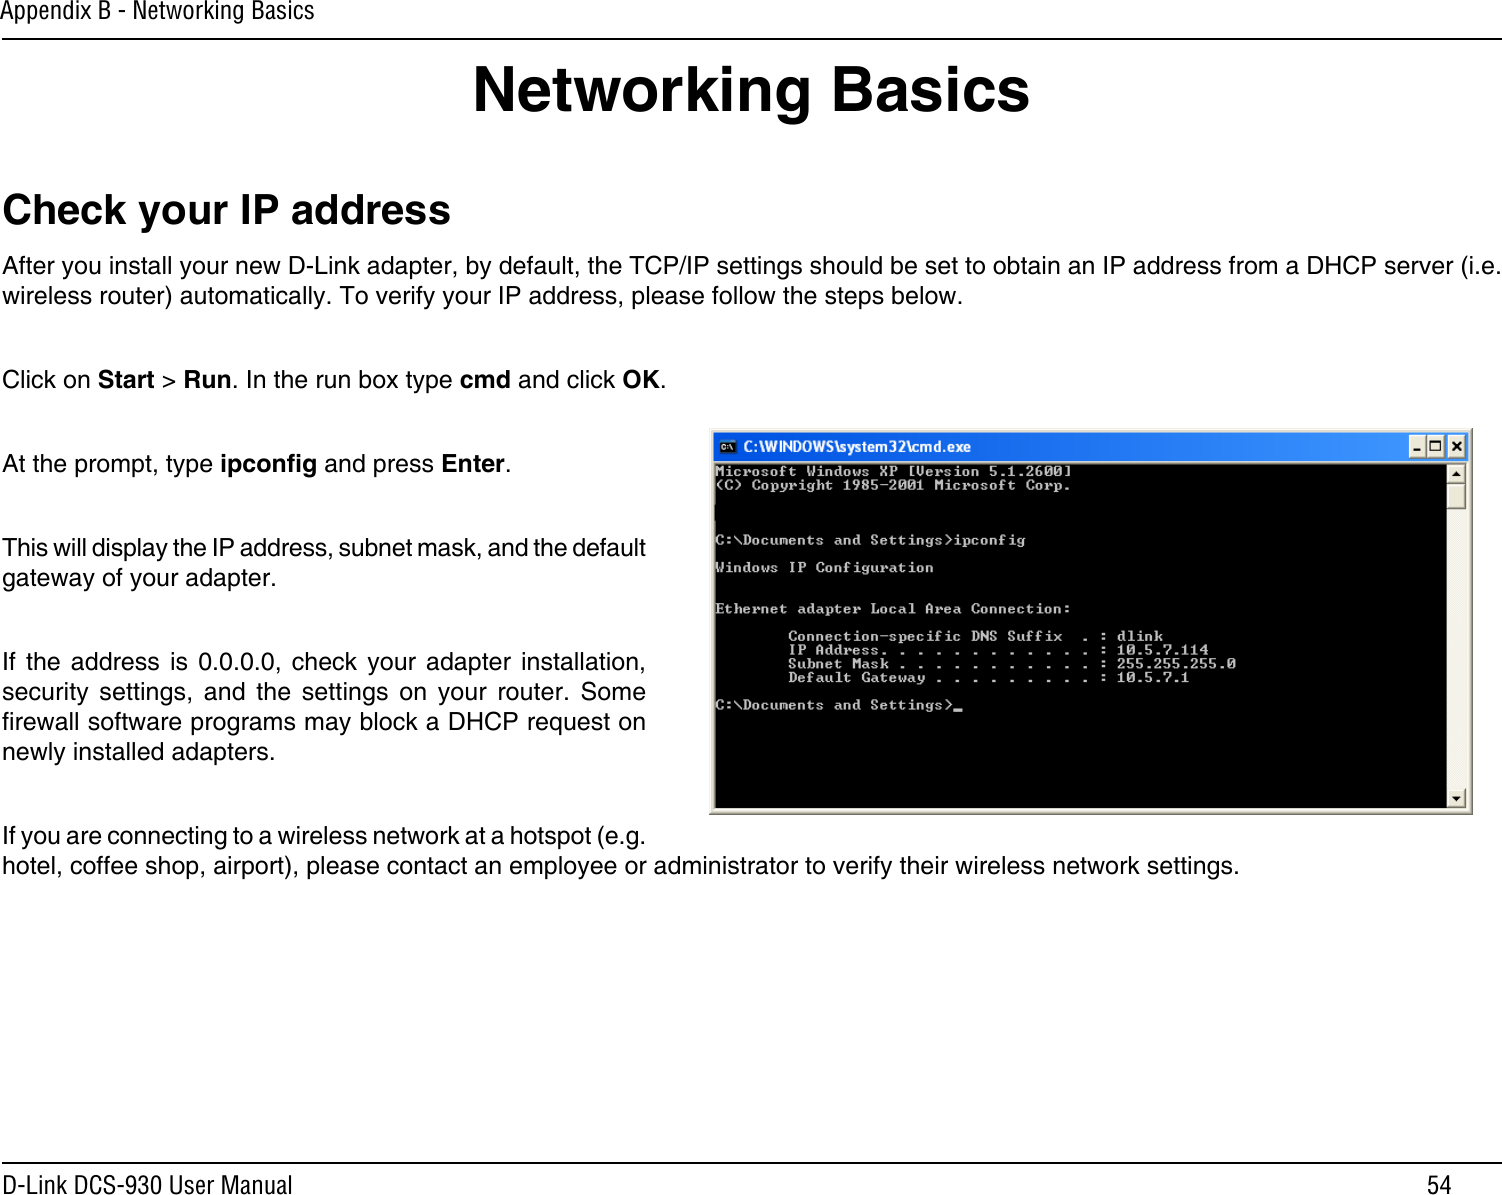 54D-Link DCS-930 User ManualAppendix B - Networking BasicsNetworking BasicsCheck your IP addressAfter you install your new D-Link adapter, by default, the TCP/IP settings should be set to obtain an IP address from a DHCP server (i.e. wireless router) automatically. To verify your IP address, please follow the steps below.Click on Start &gt; Run. In the run box type cmd and click OK.At the prompt, type ipcong and press Enter.This will display the IP address, subnet mask, and the default gateway of your adapter.If  the address  is  0.0.0.0,  check your  adapter  installation, security  settings,  and  the  settings  on your router.  Some rewall software programs may block a DHCP request on newly installed adapters. If you are connecting to a wireless network at a hotspot (e.g. hotel, coffee shop, airport), please contact an employee or administrator to verify their wireless network settings.